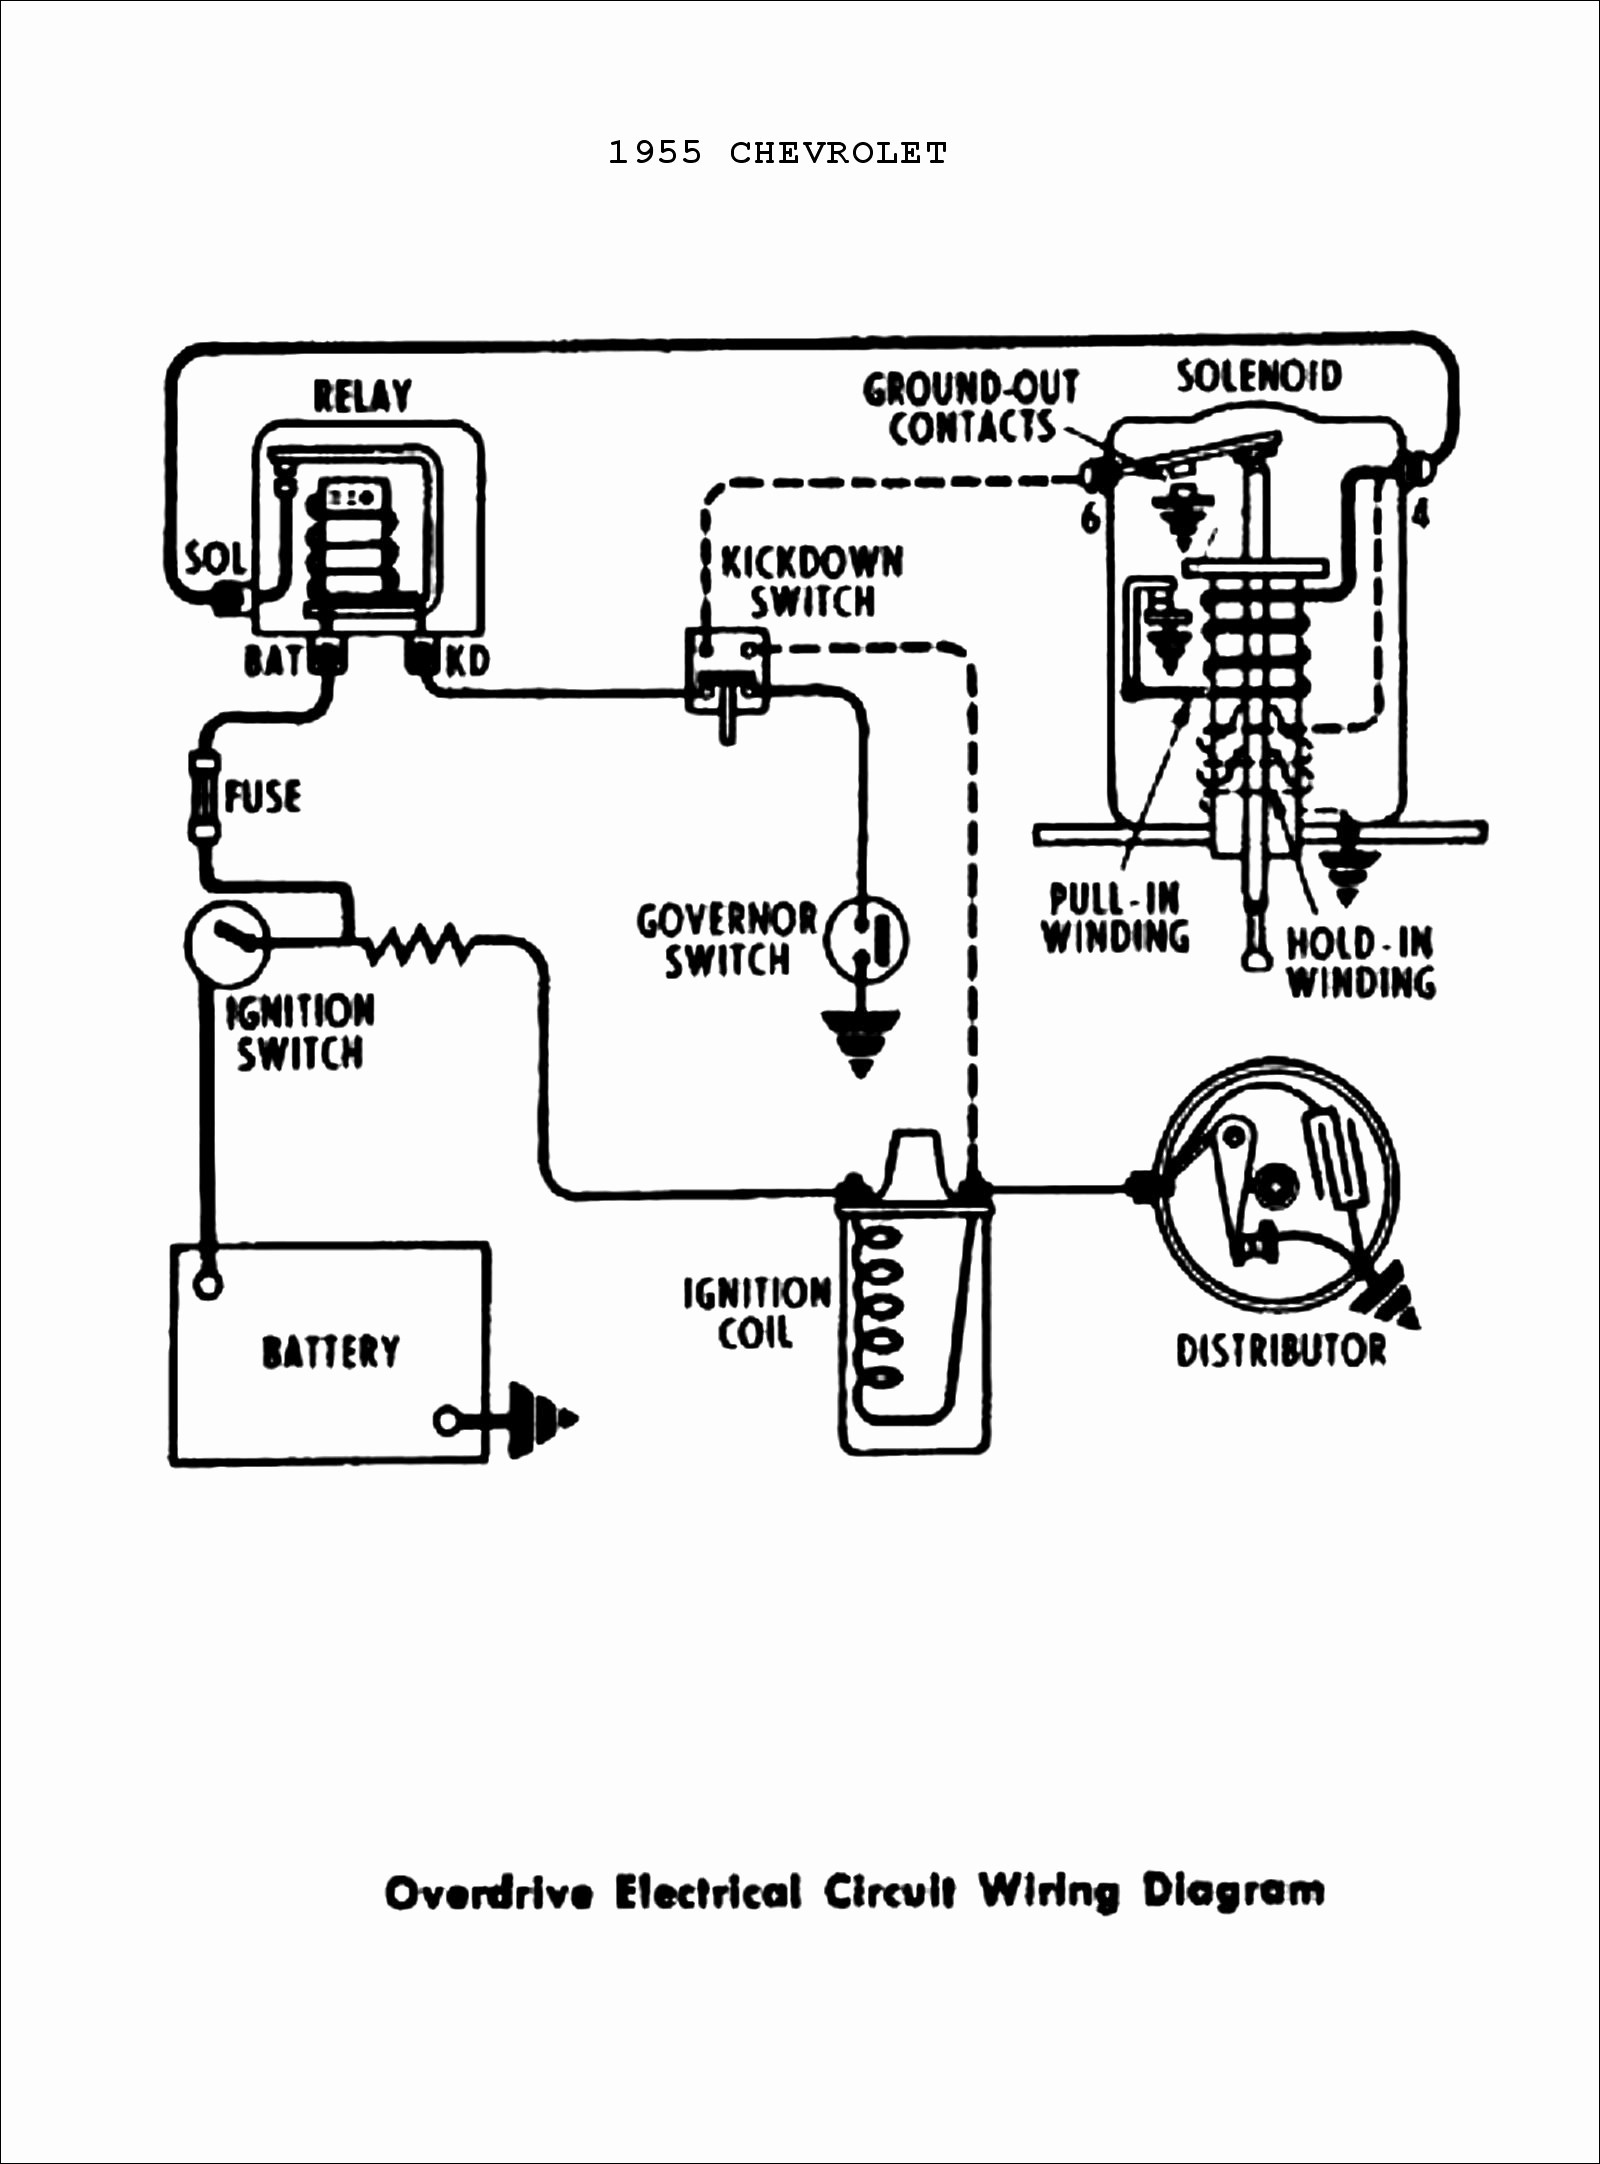 Points and Condenser Wiring Diagram New Ignition Coil Wiring Diagram Wiring Diagram